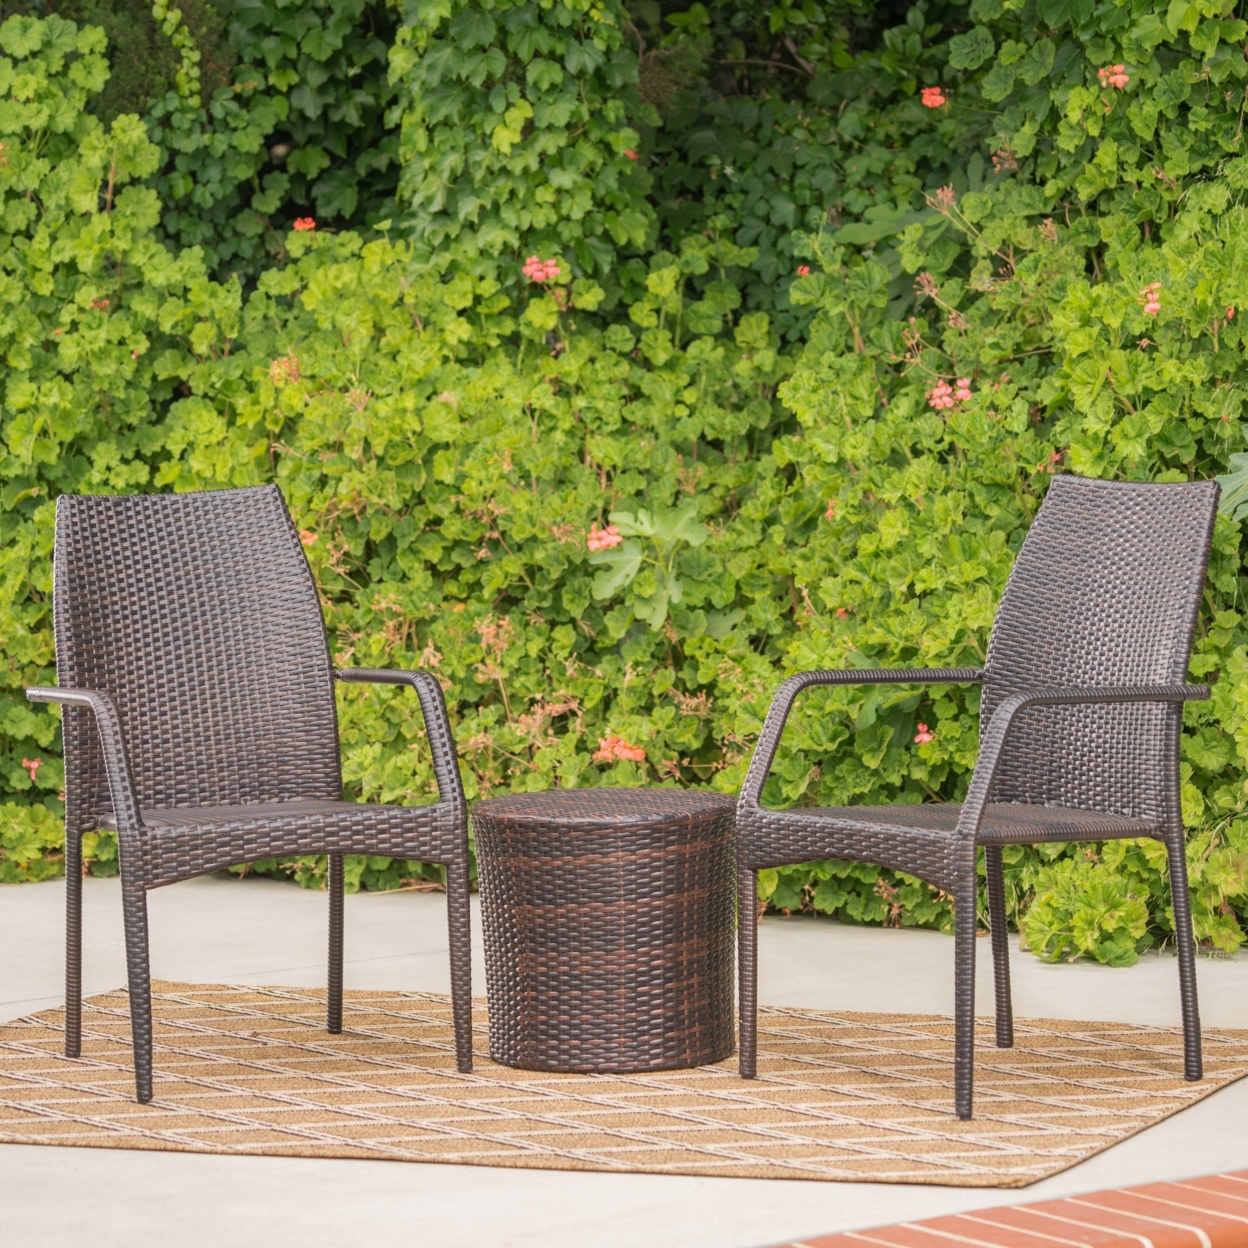 Dawson Outdoor 3 Piece Multi-brown Wicker Stacking Chair Chat Set - Trapezoid Table, Brown